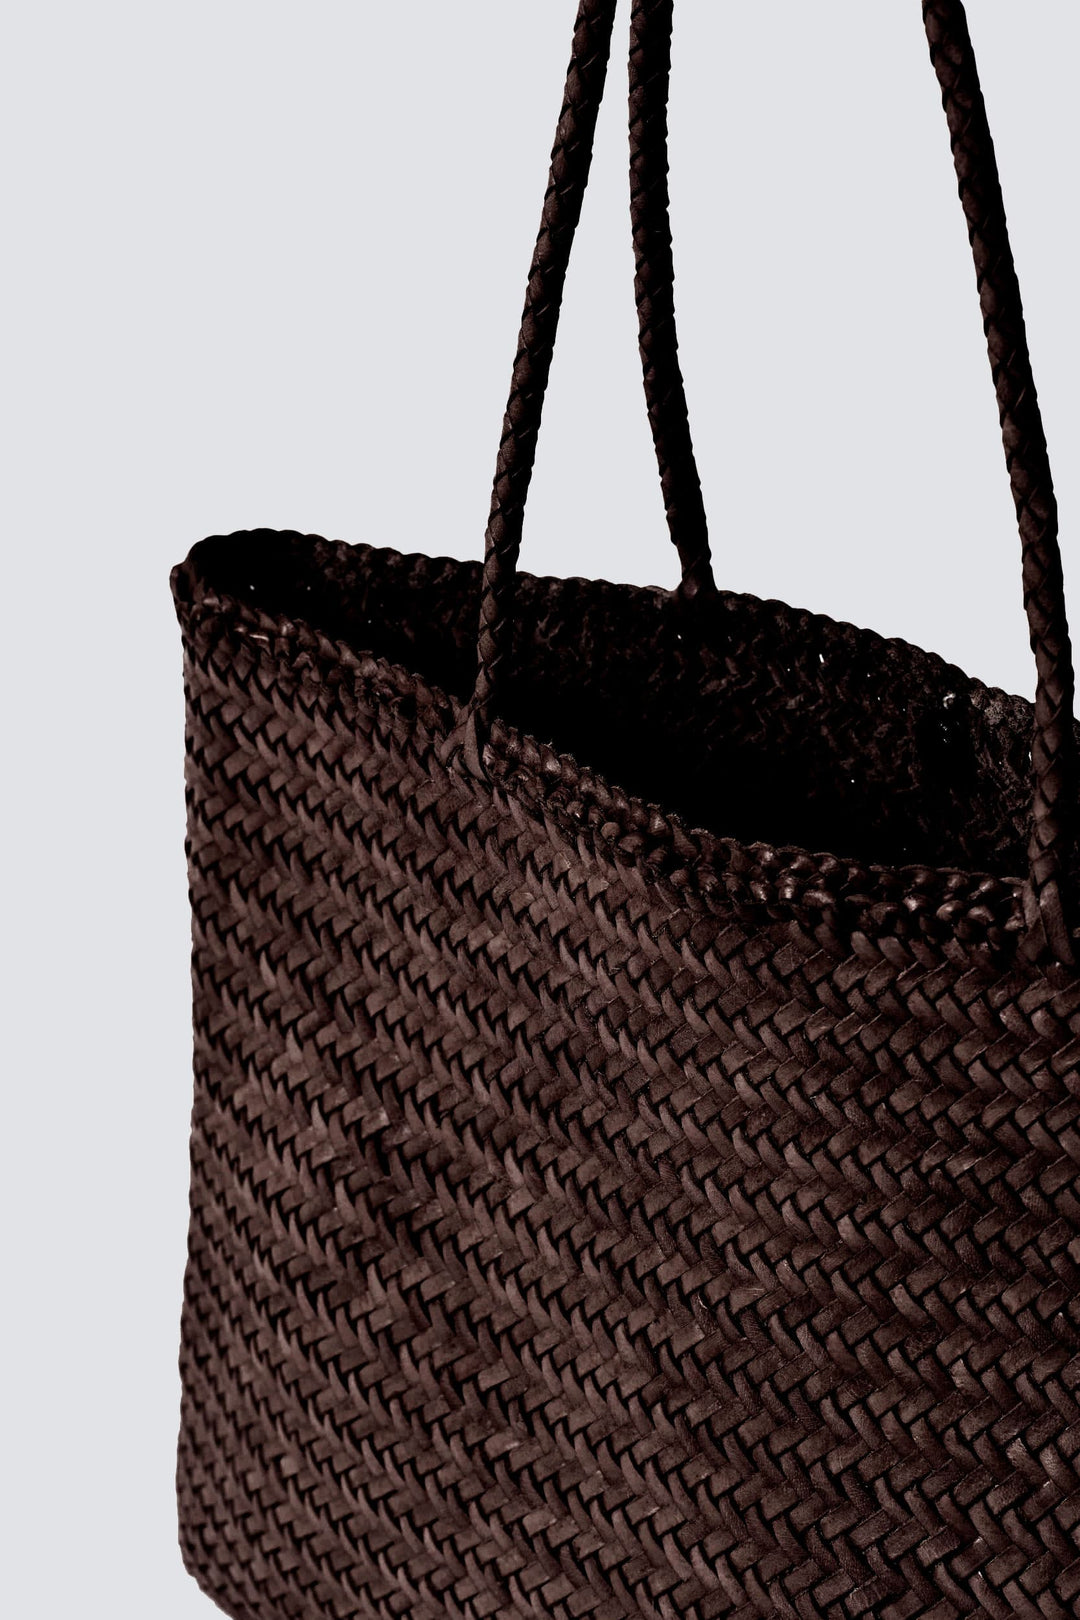 Dragon Diffusion woven leather bag handmade - Sophie Large Dark Brown